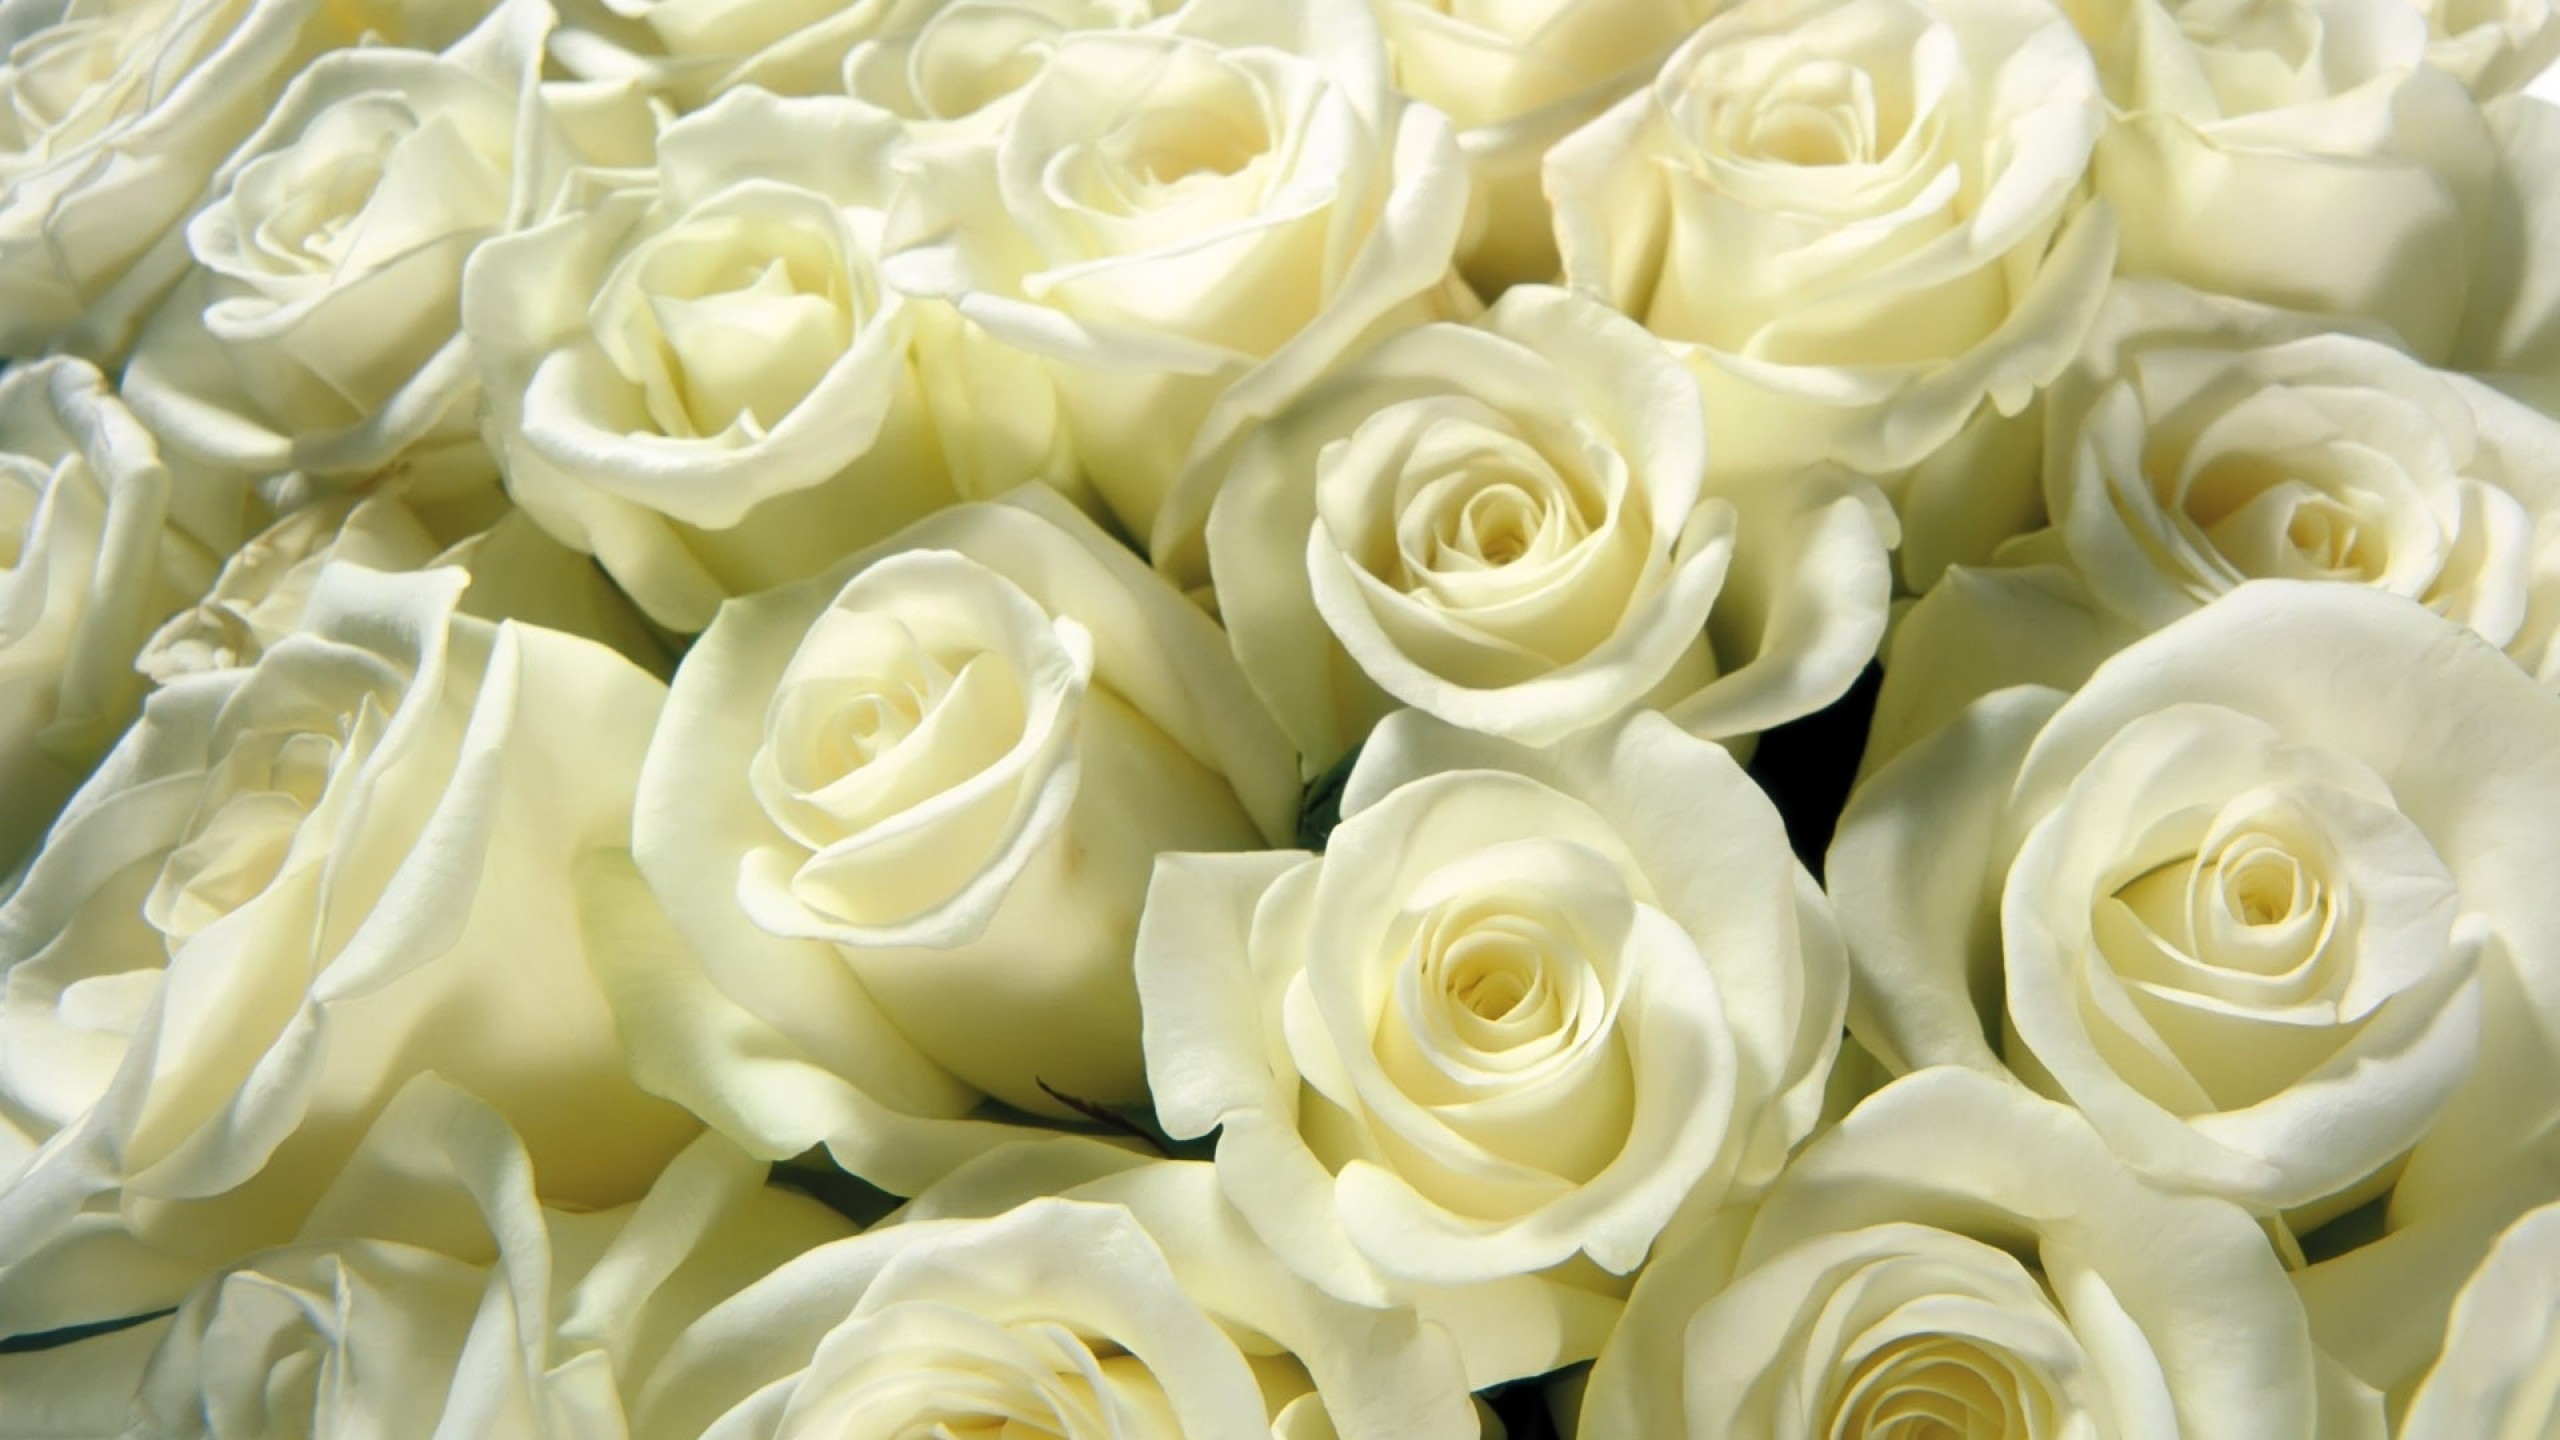 White Roses Wallpapers   Wallpaper High Definition High